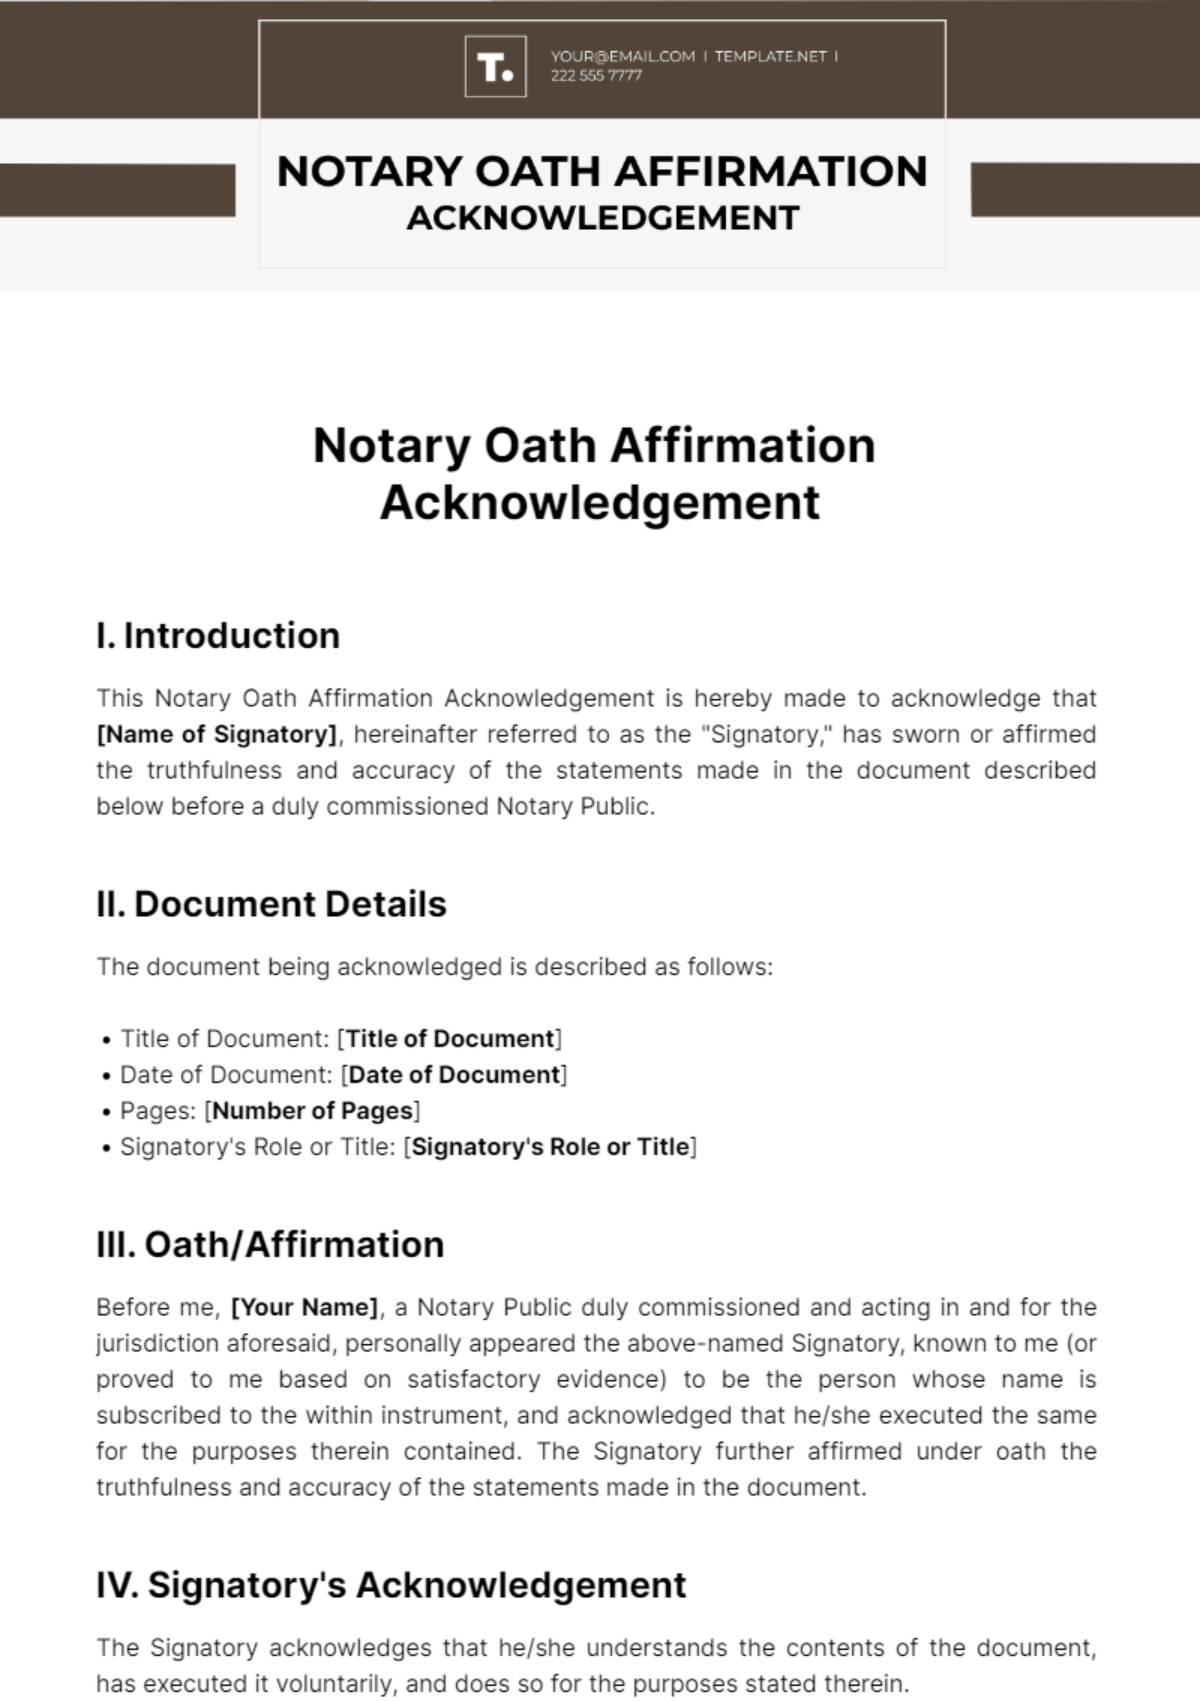 Free Notary Oath Affirmation Acknowledgement Template